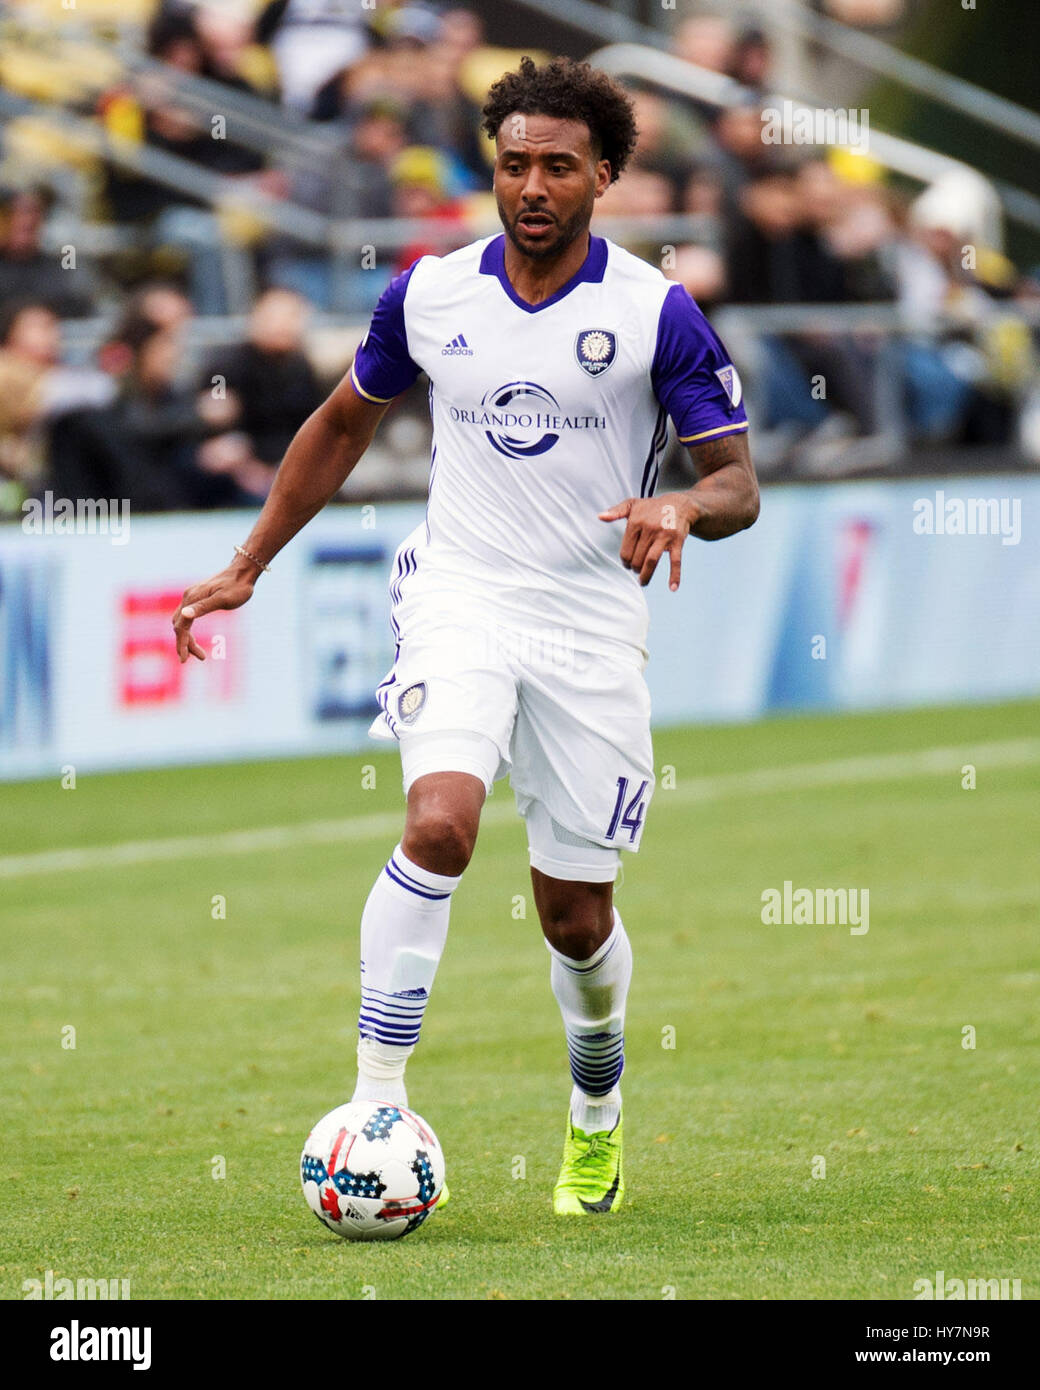 April 1, 2017: Orlando City SC forward Giles Barnes (14) dribbles the ball down the pitch against Columbus in their match at Mapfre Stadium in Columbus, Ohio. Brent Clark/Alamy Stock Photo